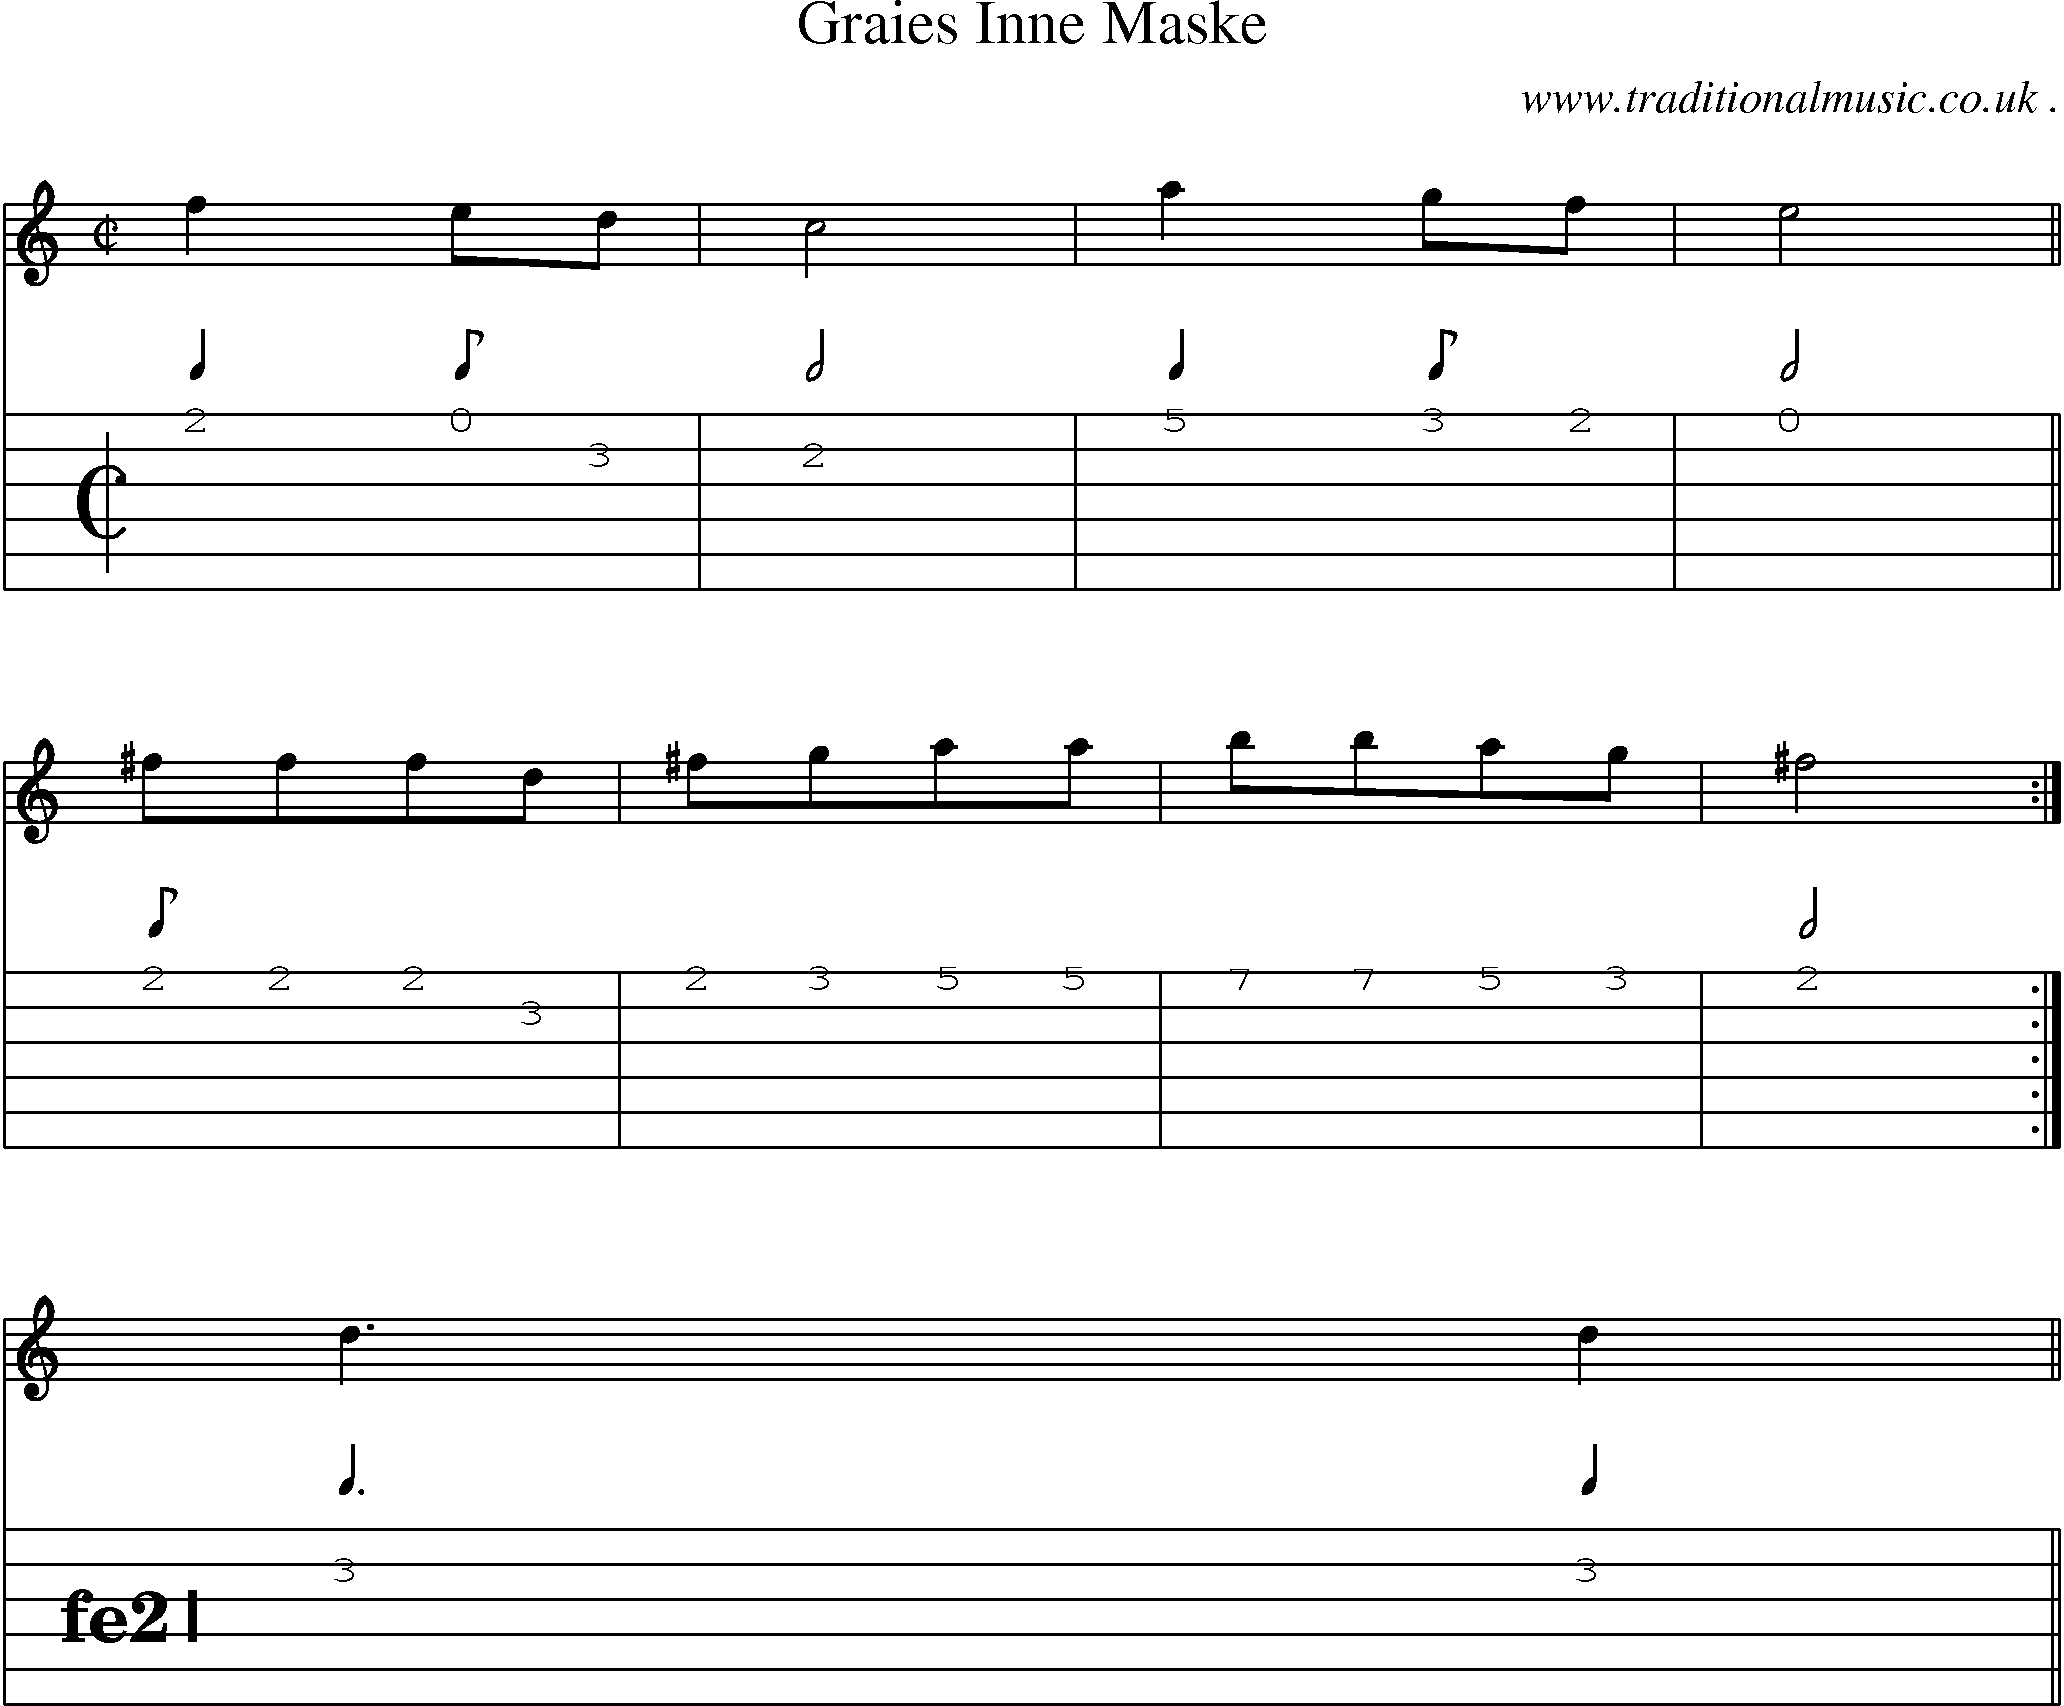 Sheet-Music and Guitar Tabs for Graies Inne Maske